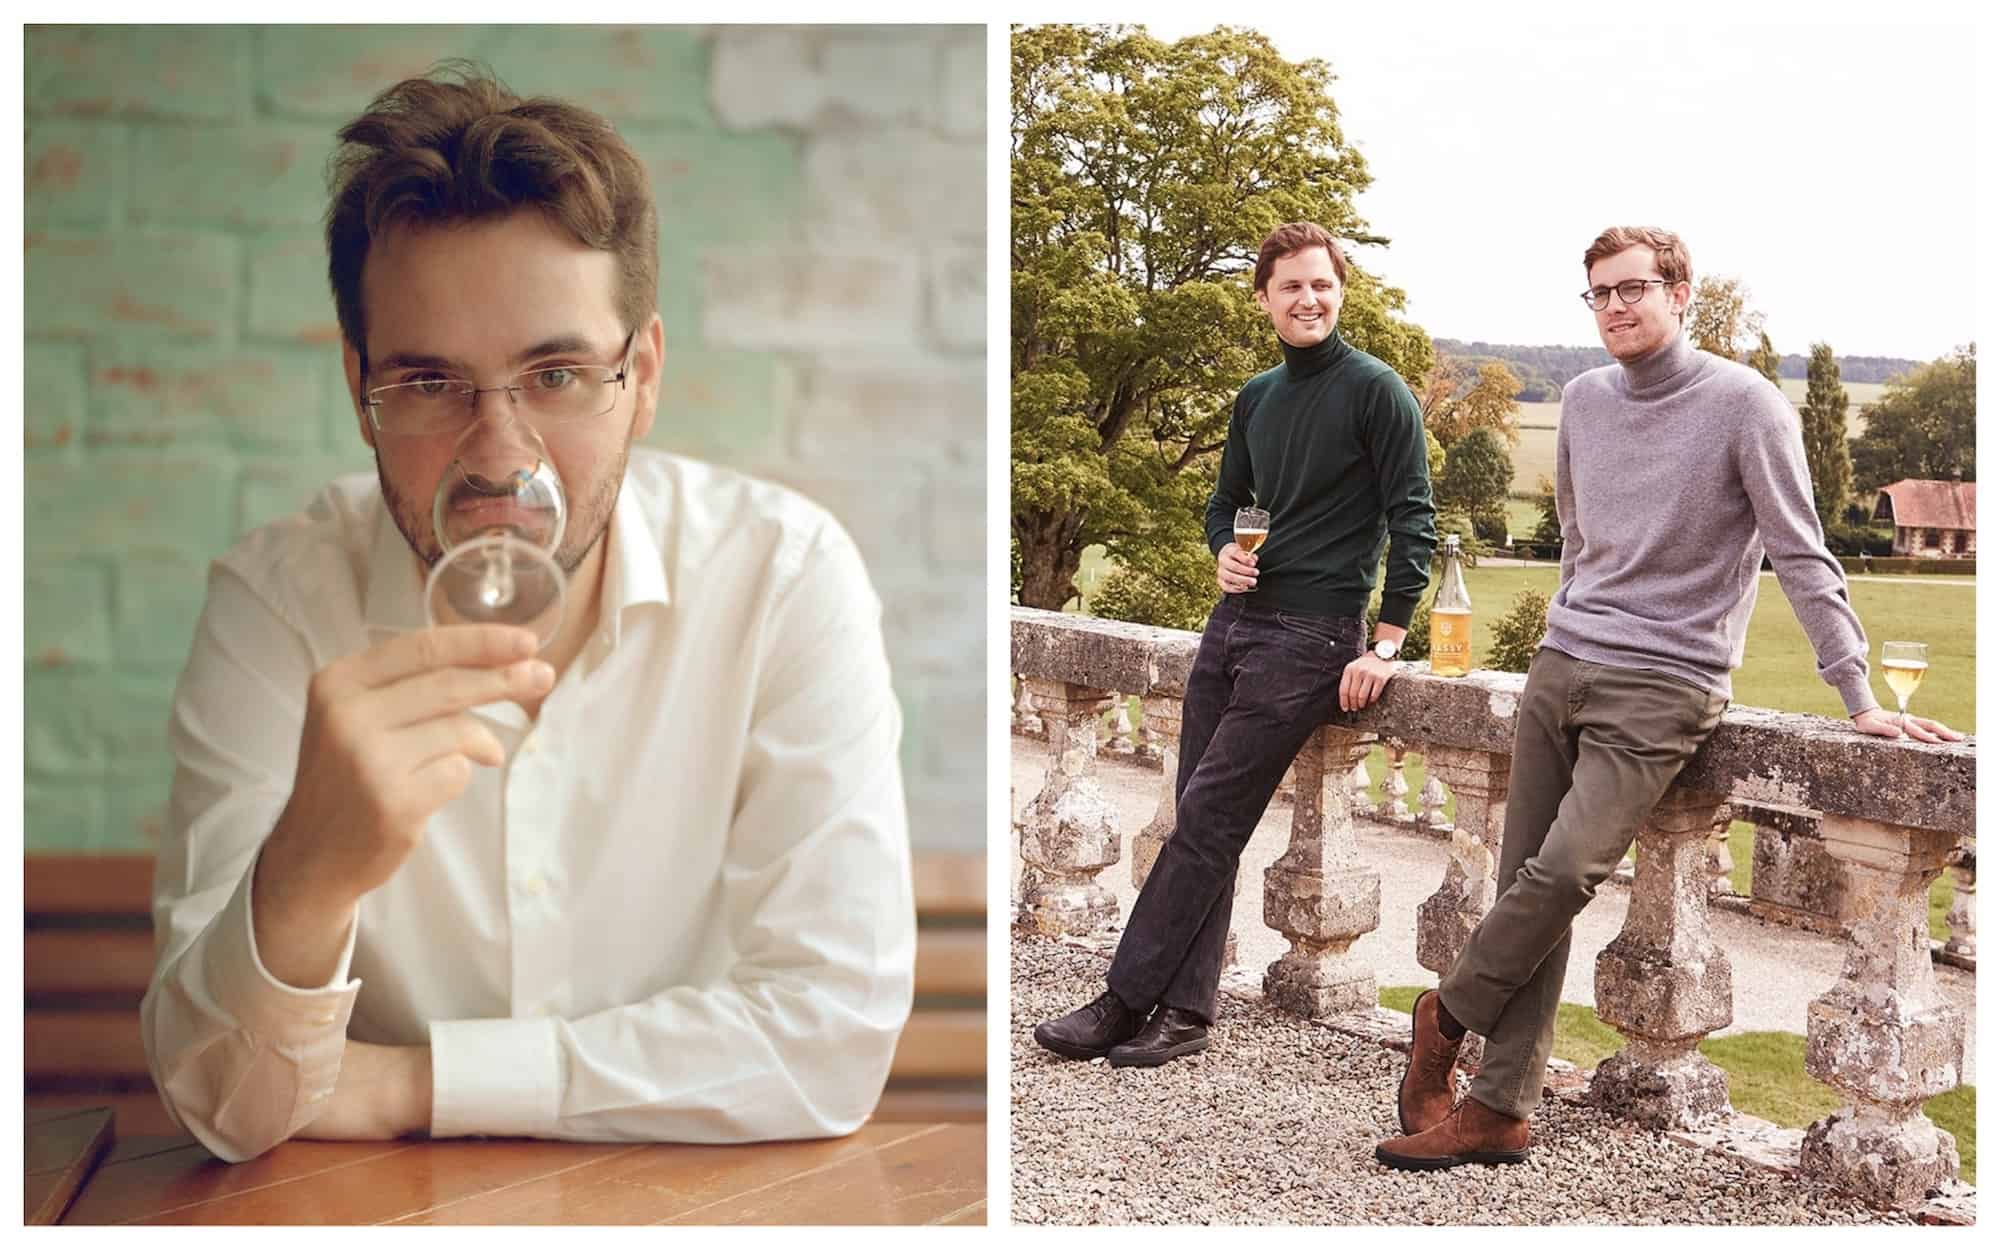 One of the best podcasts in Paris about cocktails is Paris Cocktail Talk by Forest Collins, pictured on the left holding a glass to his mouth, and on the right on a wine estate in France.